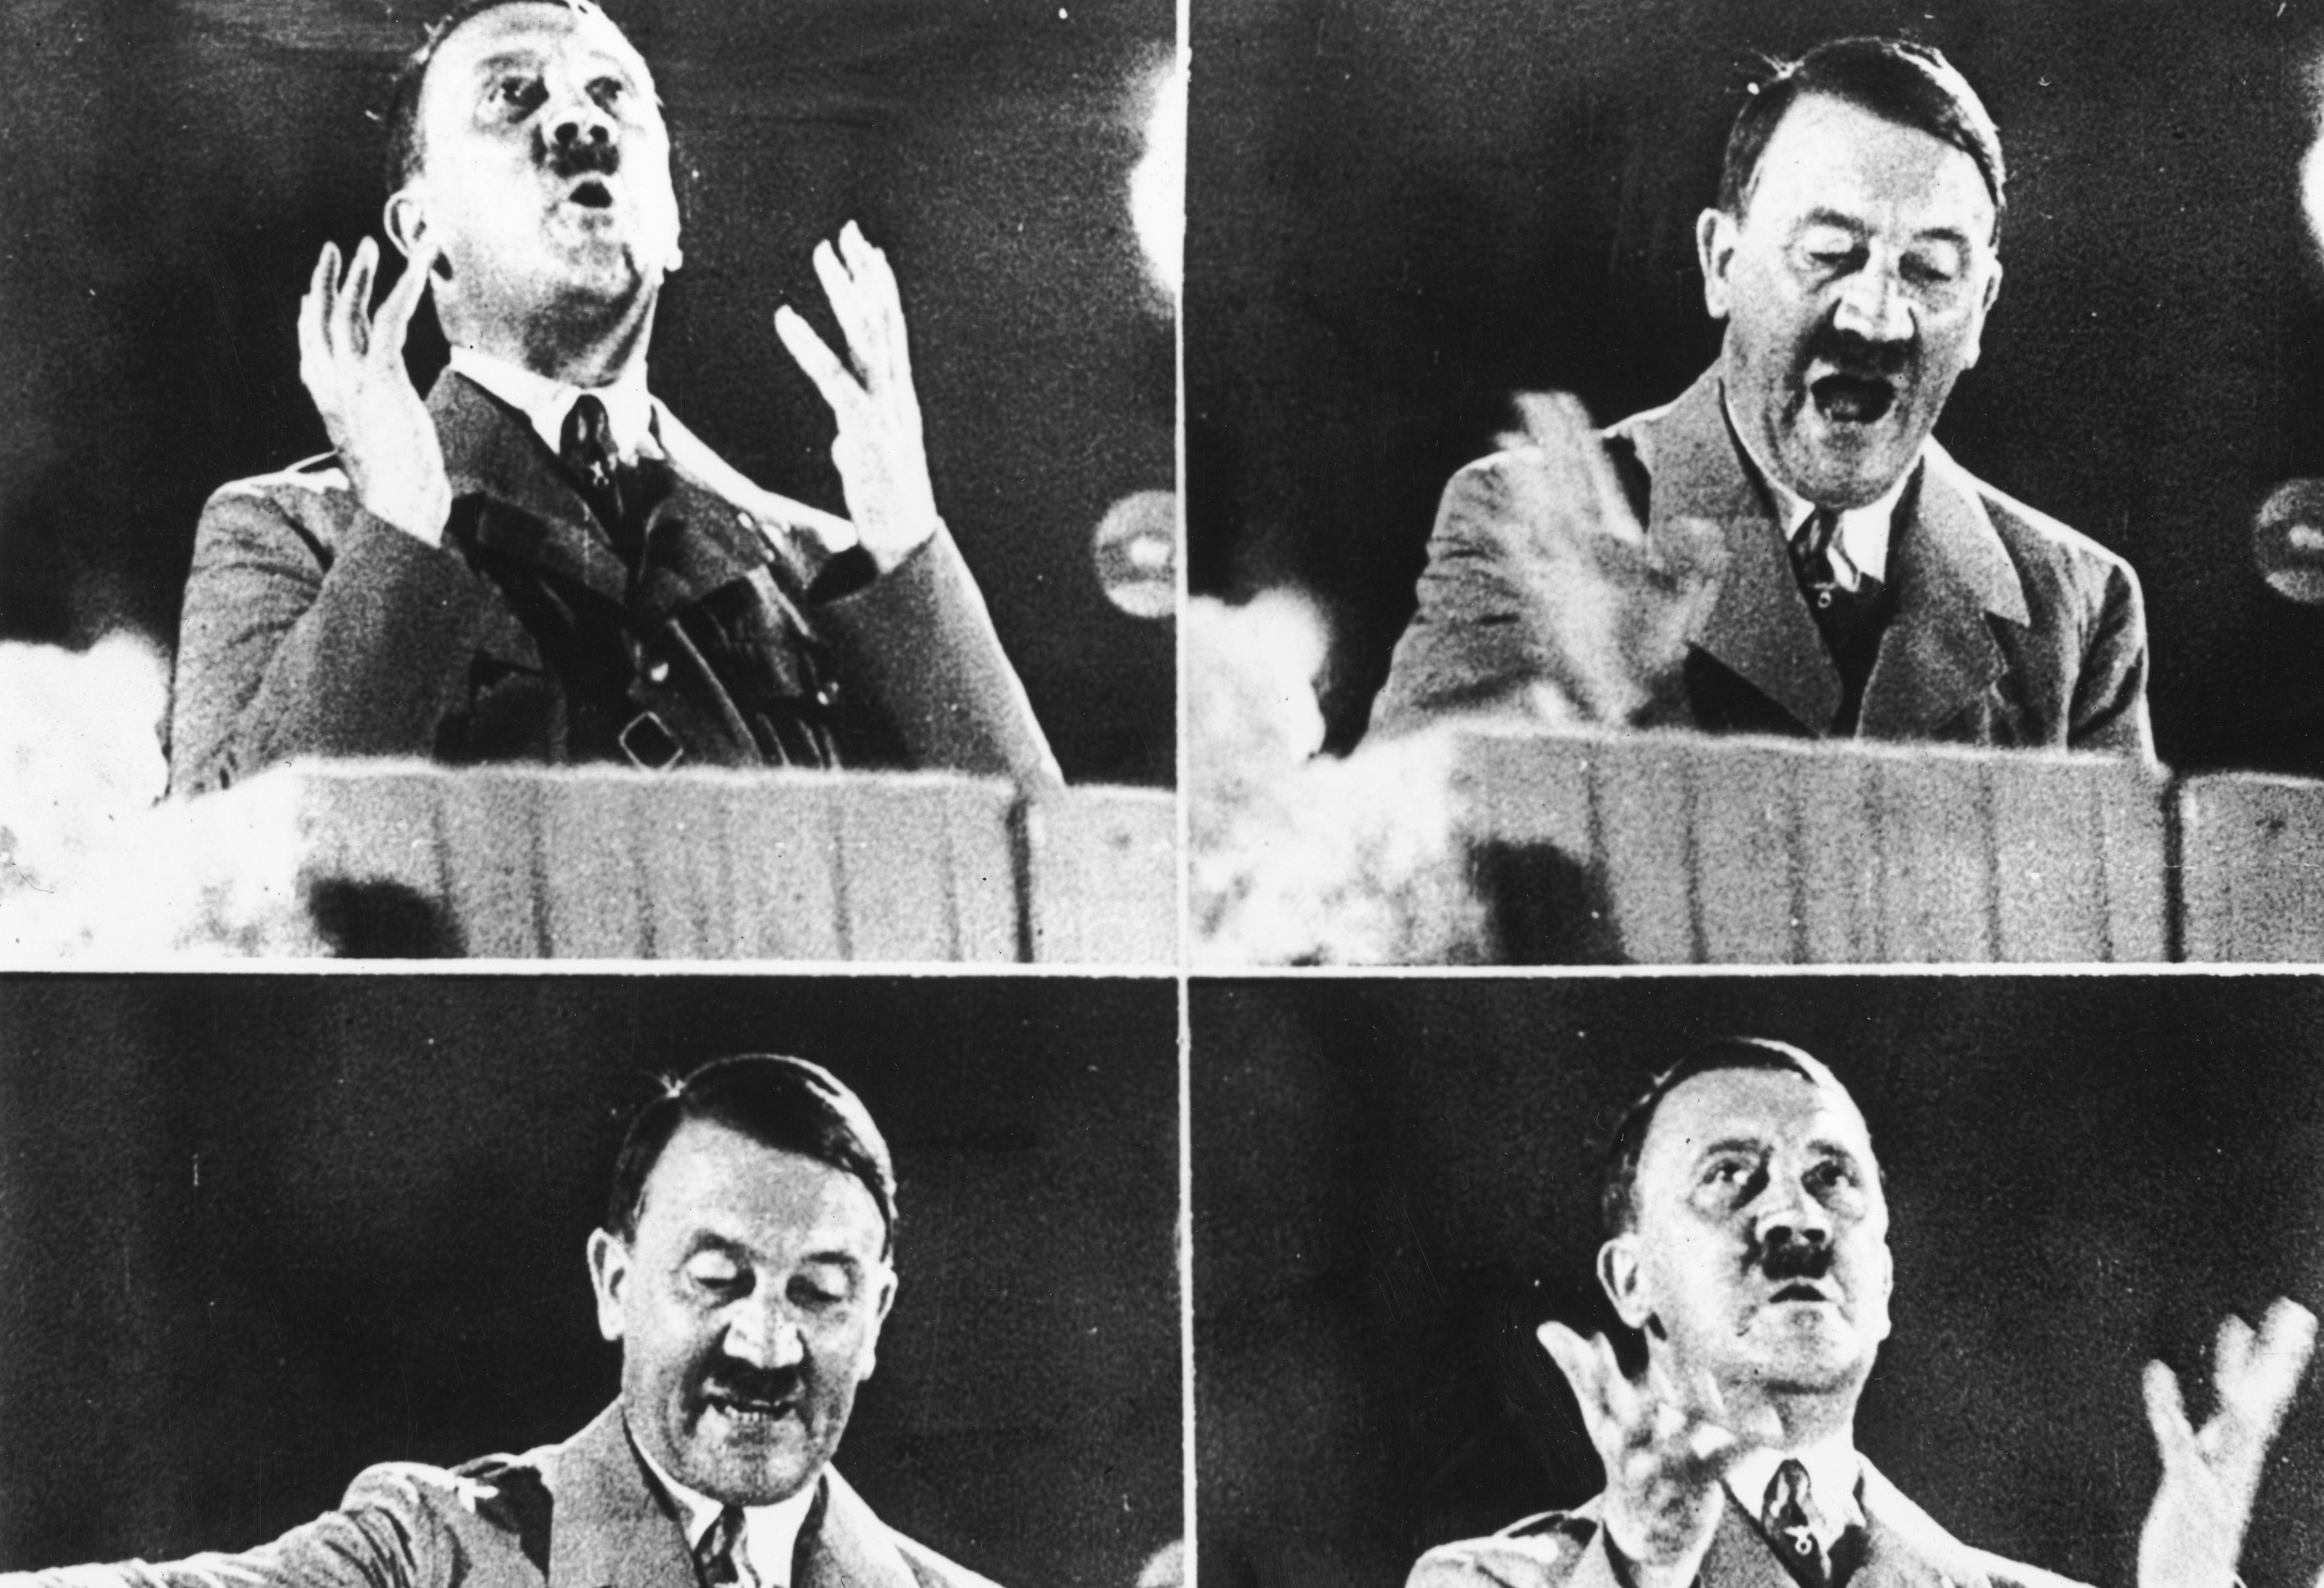 NSFW historical figure facts - hitler speech expressions